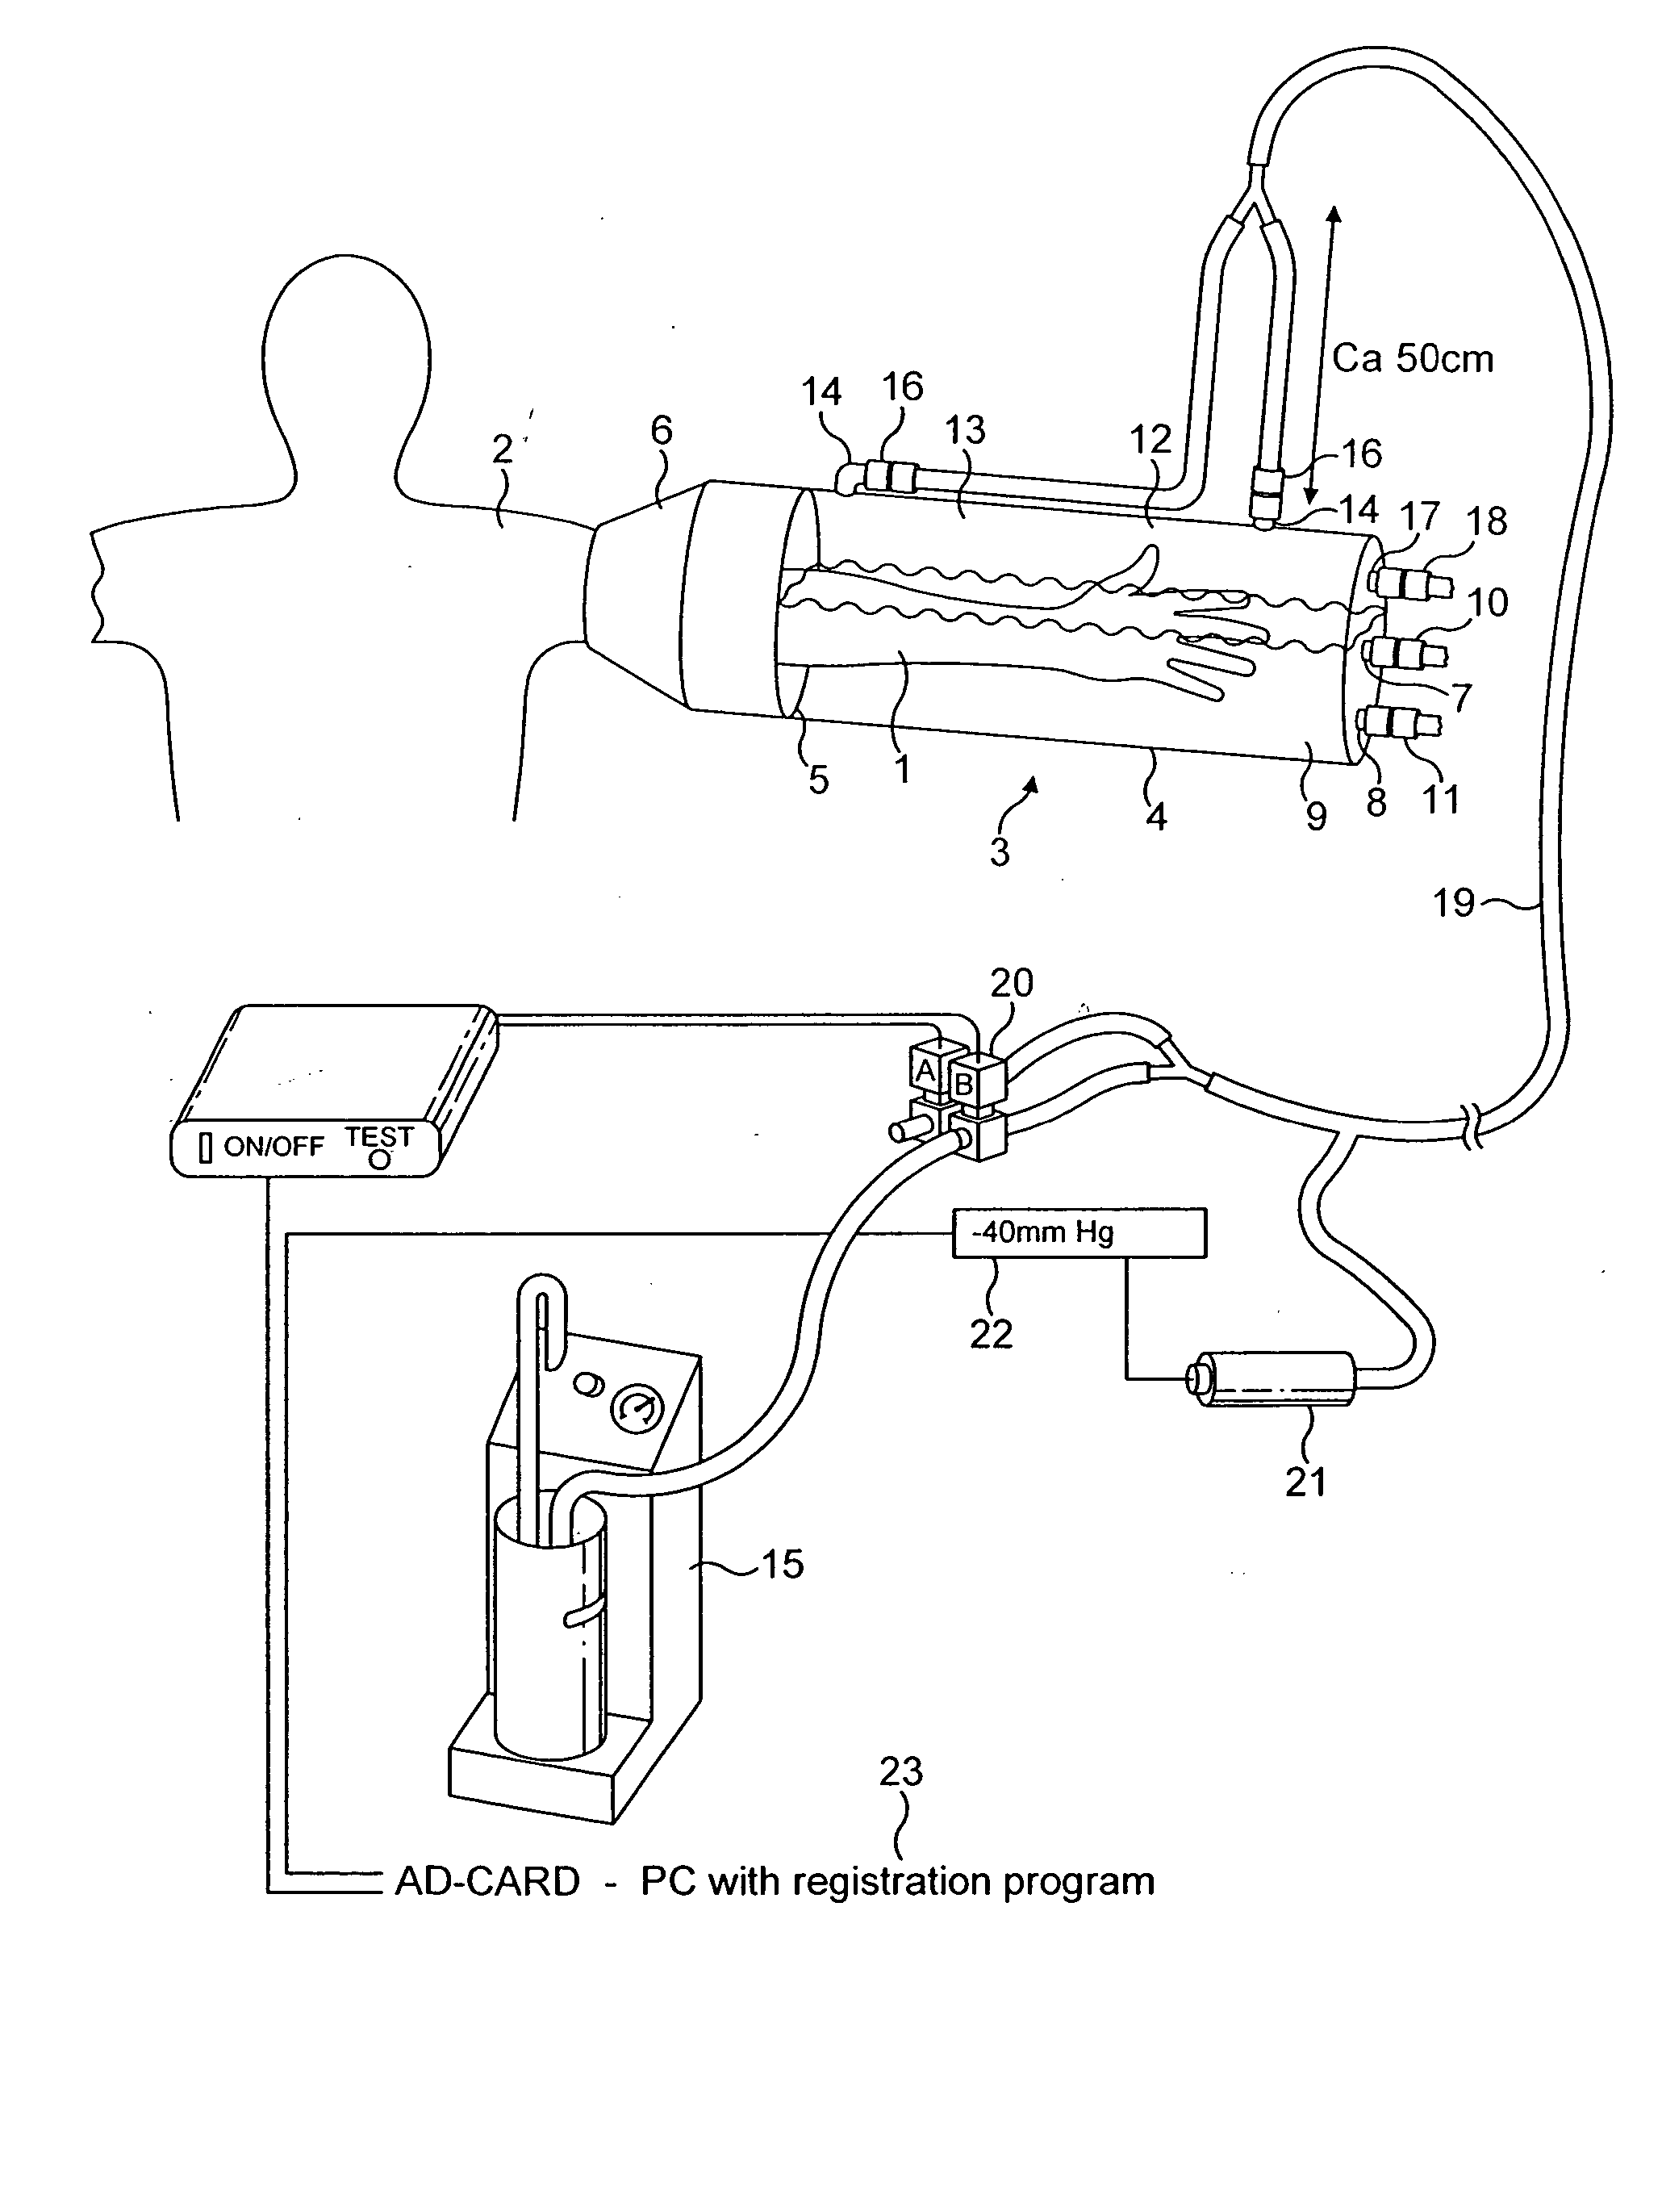 Device for applying a pulsating pressure to a local region of the body and applications thereof